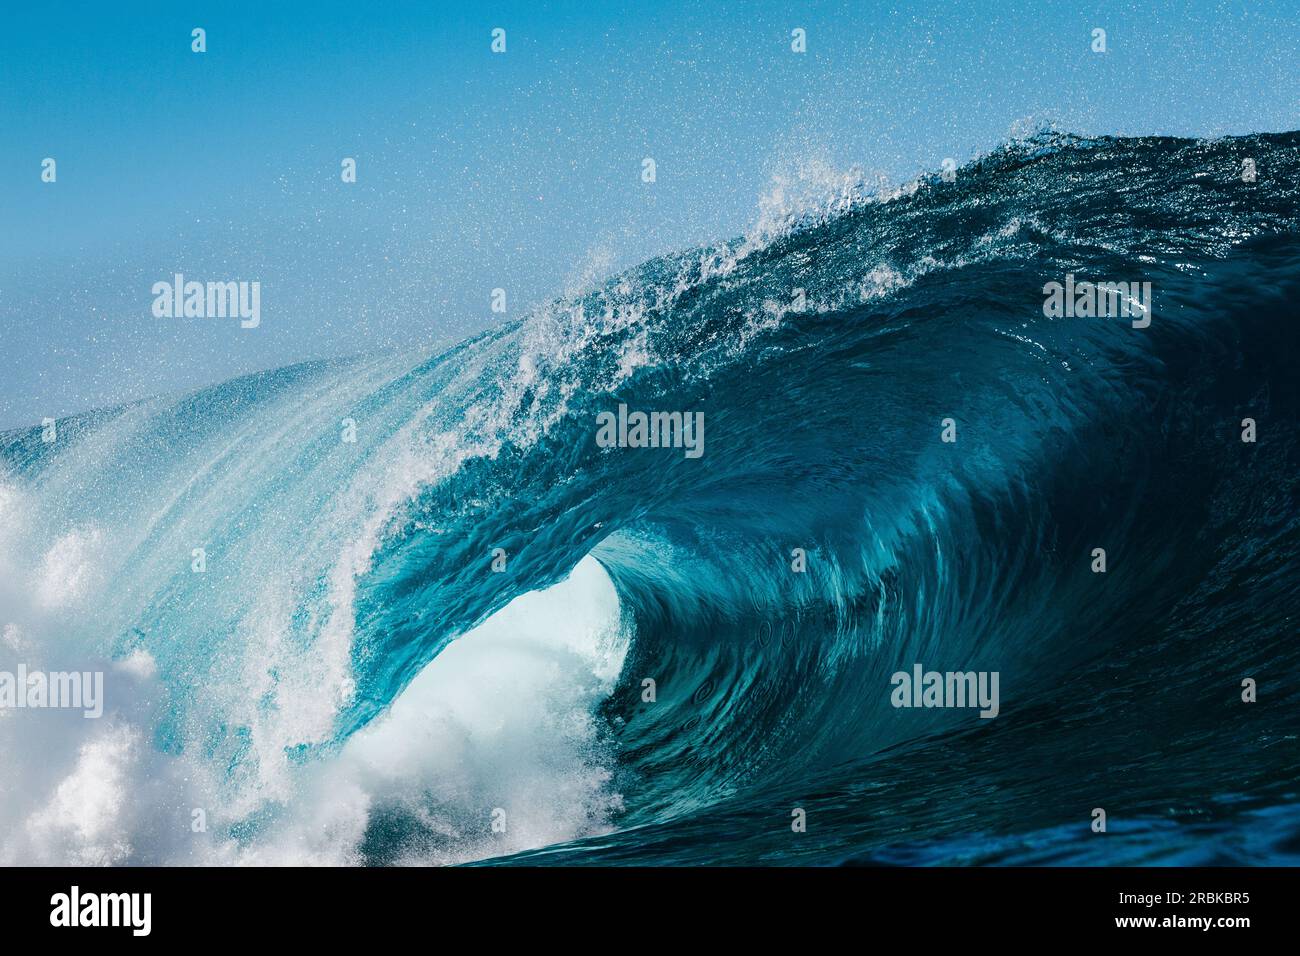 The blue barrels of the waves in the Atlantic Ocean Stock Photo